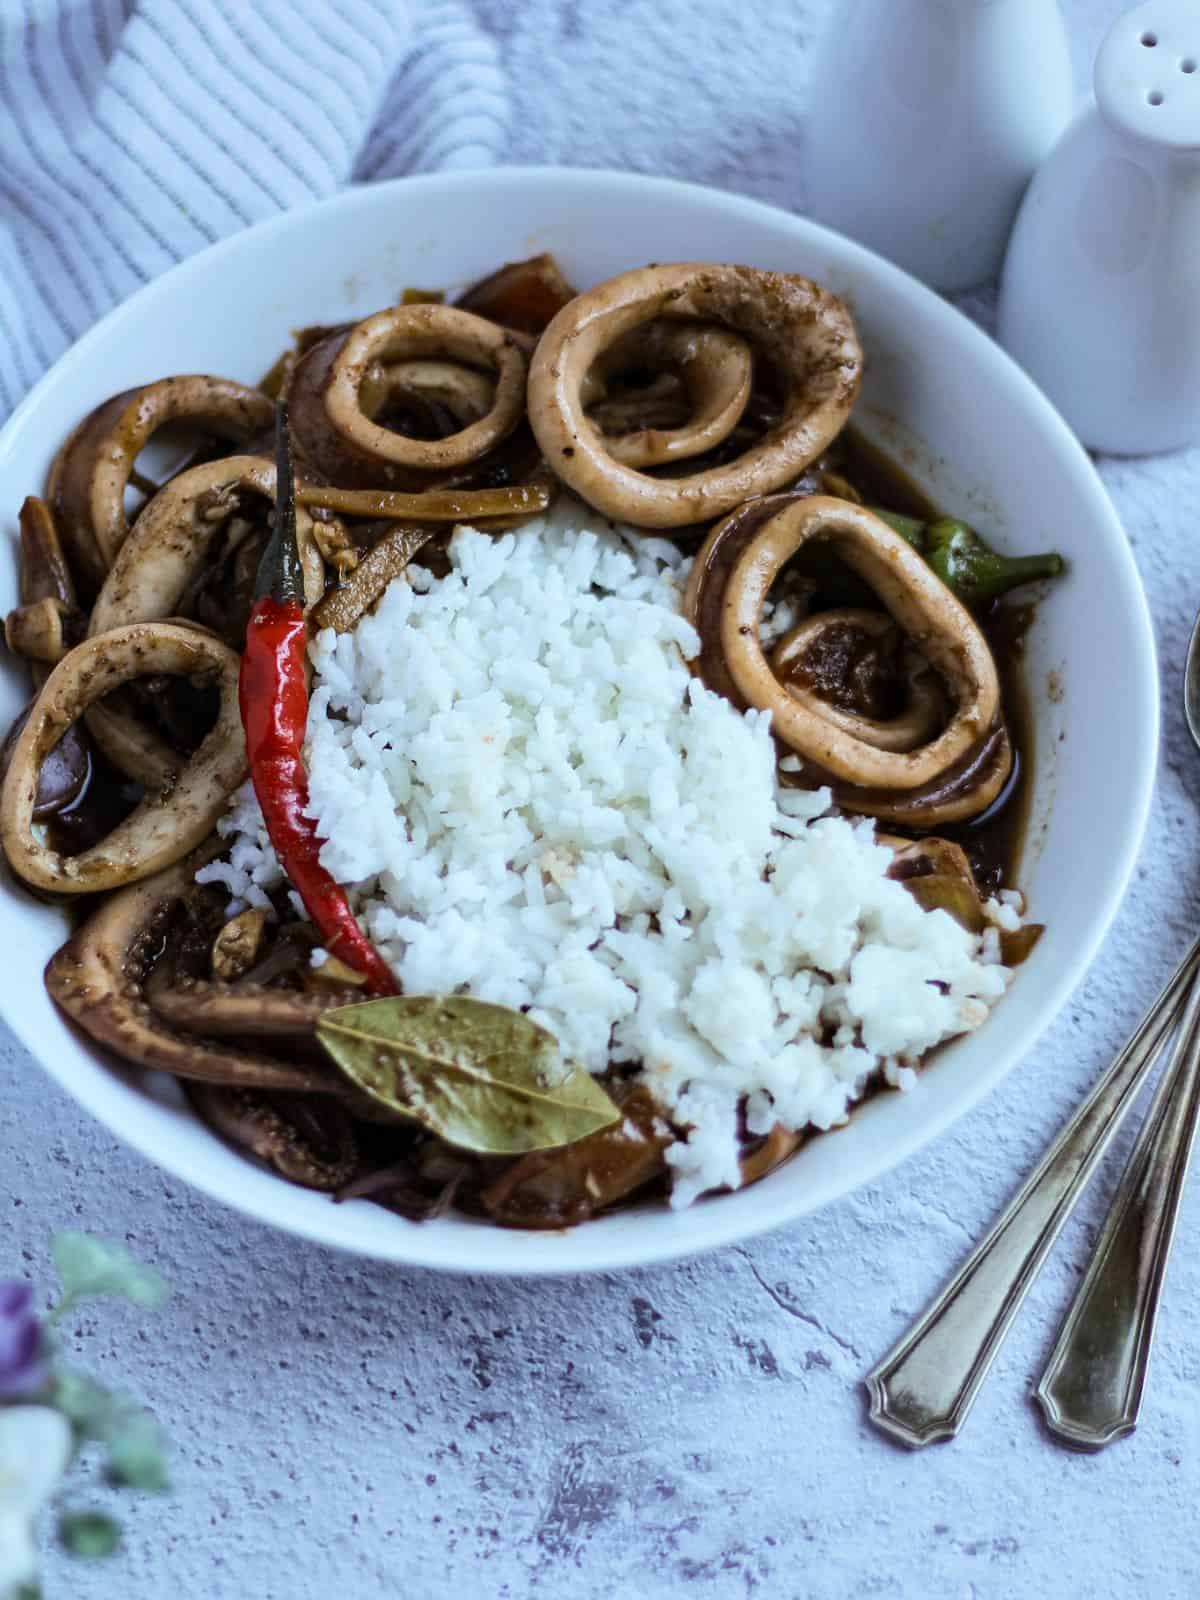 Squid adobo with rice in a plate.